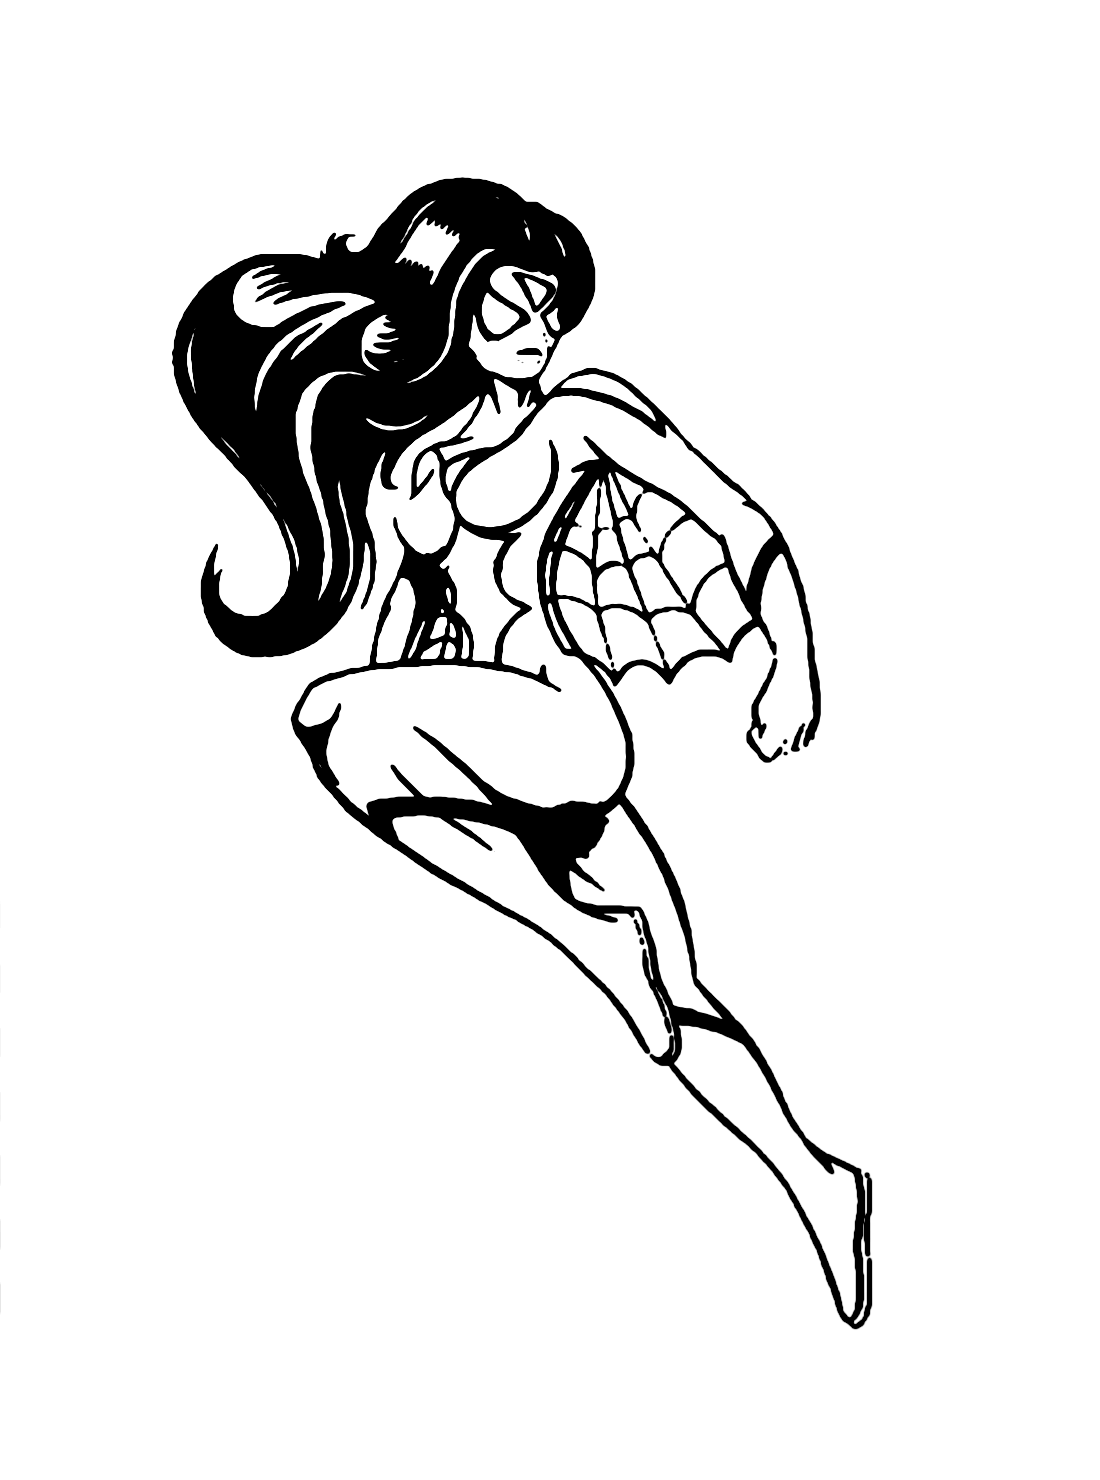 Spider woman drawing